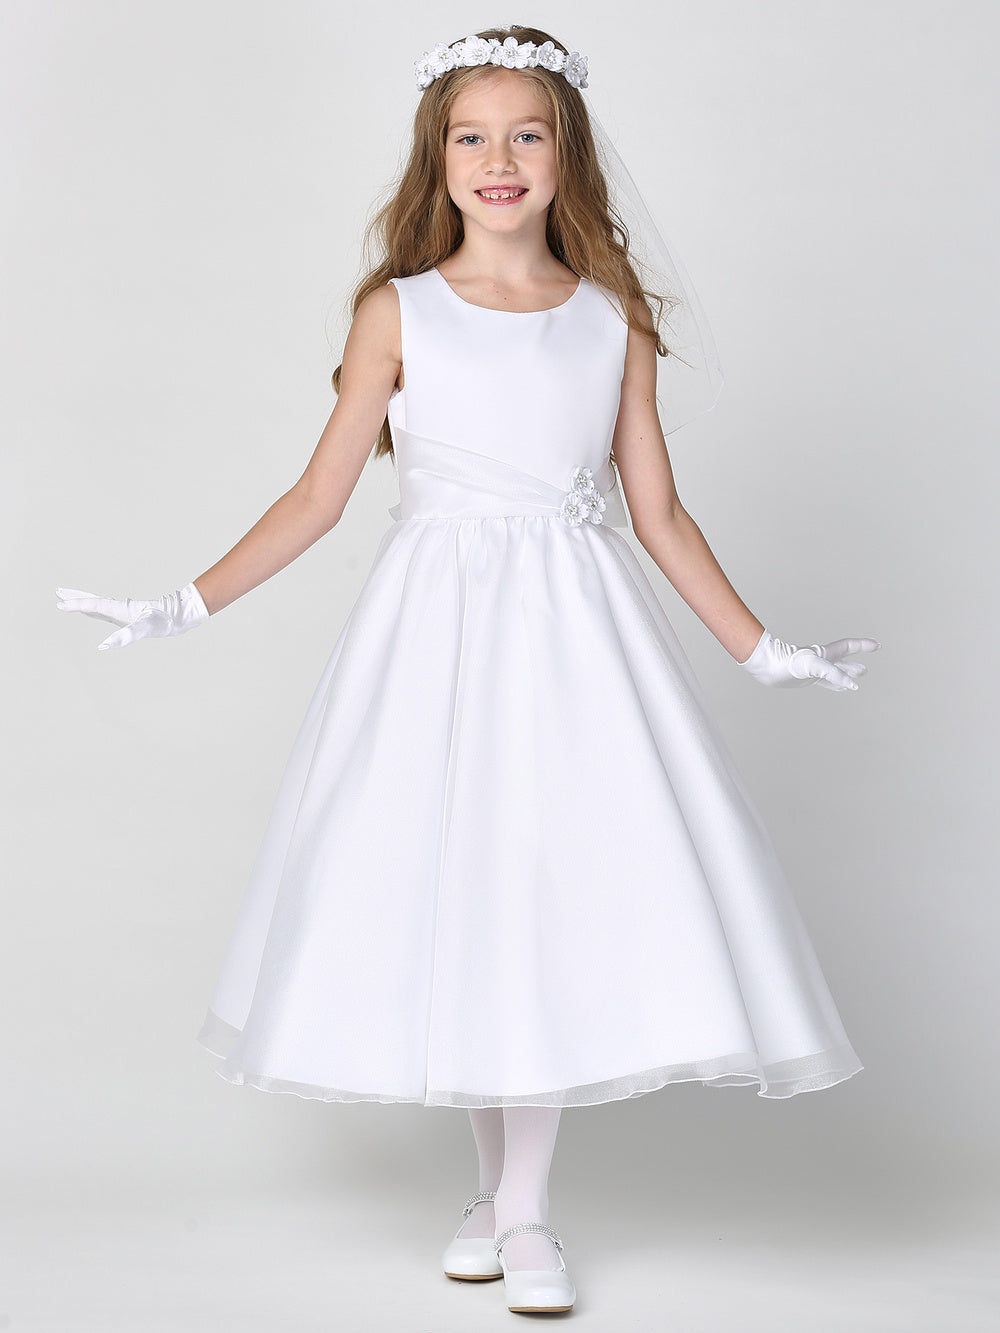 A girl wearing an elegant white First Communion Dress with a satin bodice and crystal organza skirt.